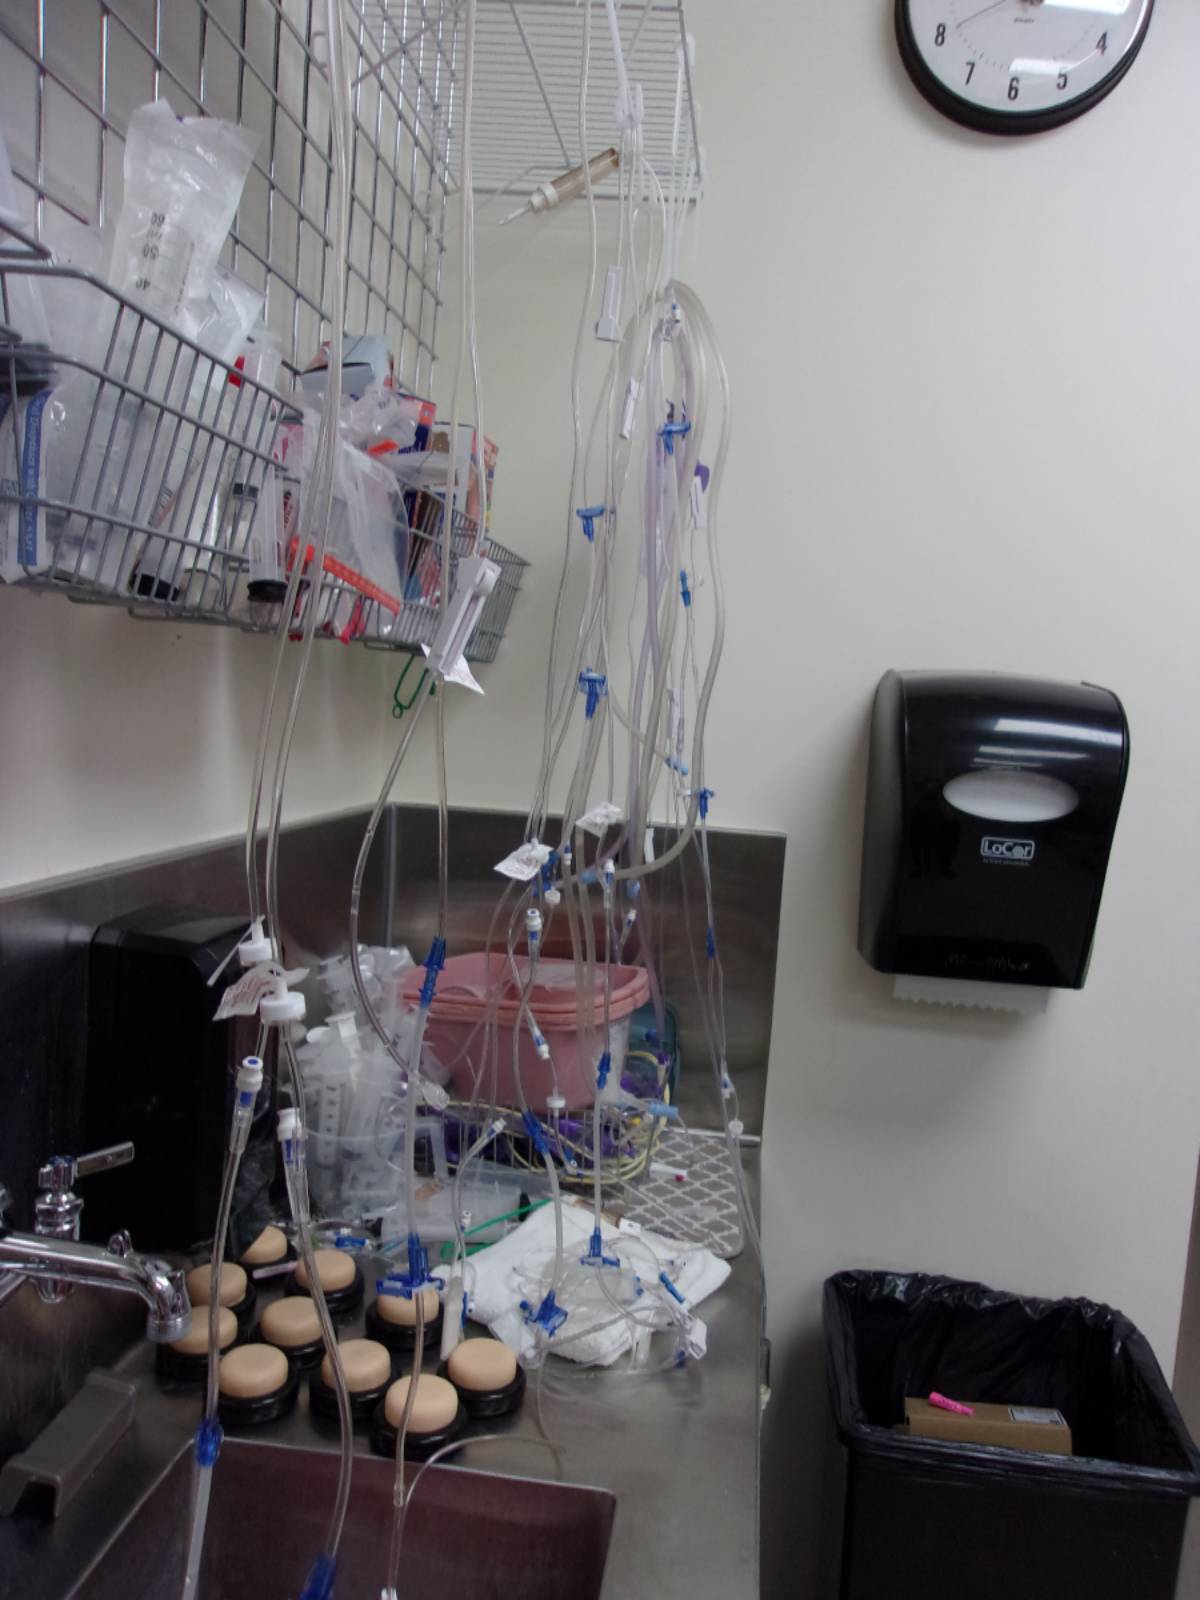 washed instructional infusion kits drying prior to reuse